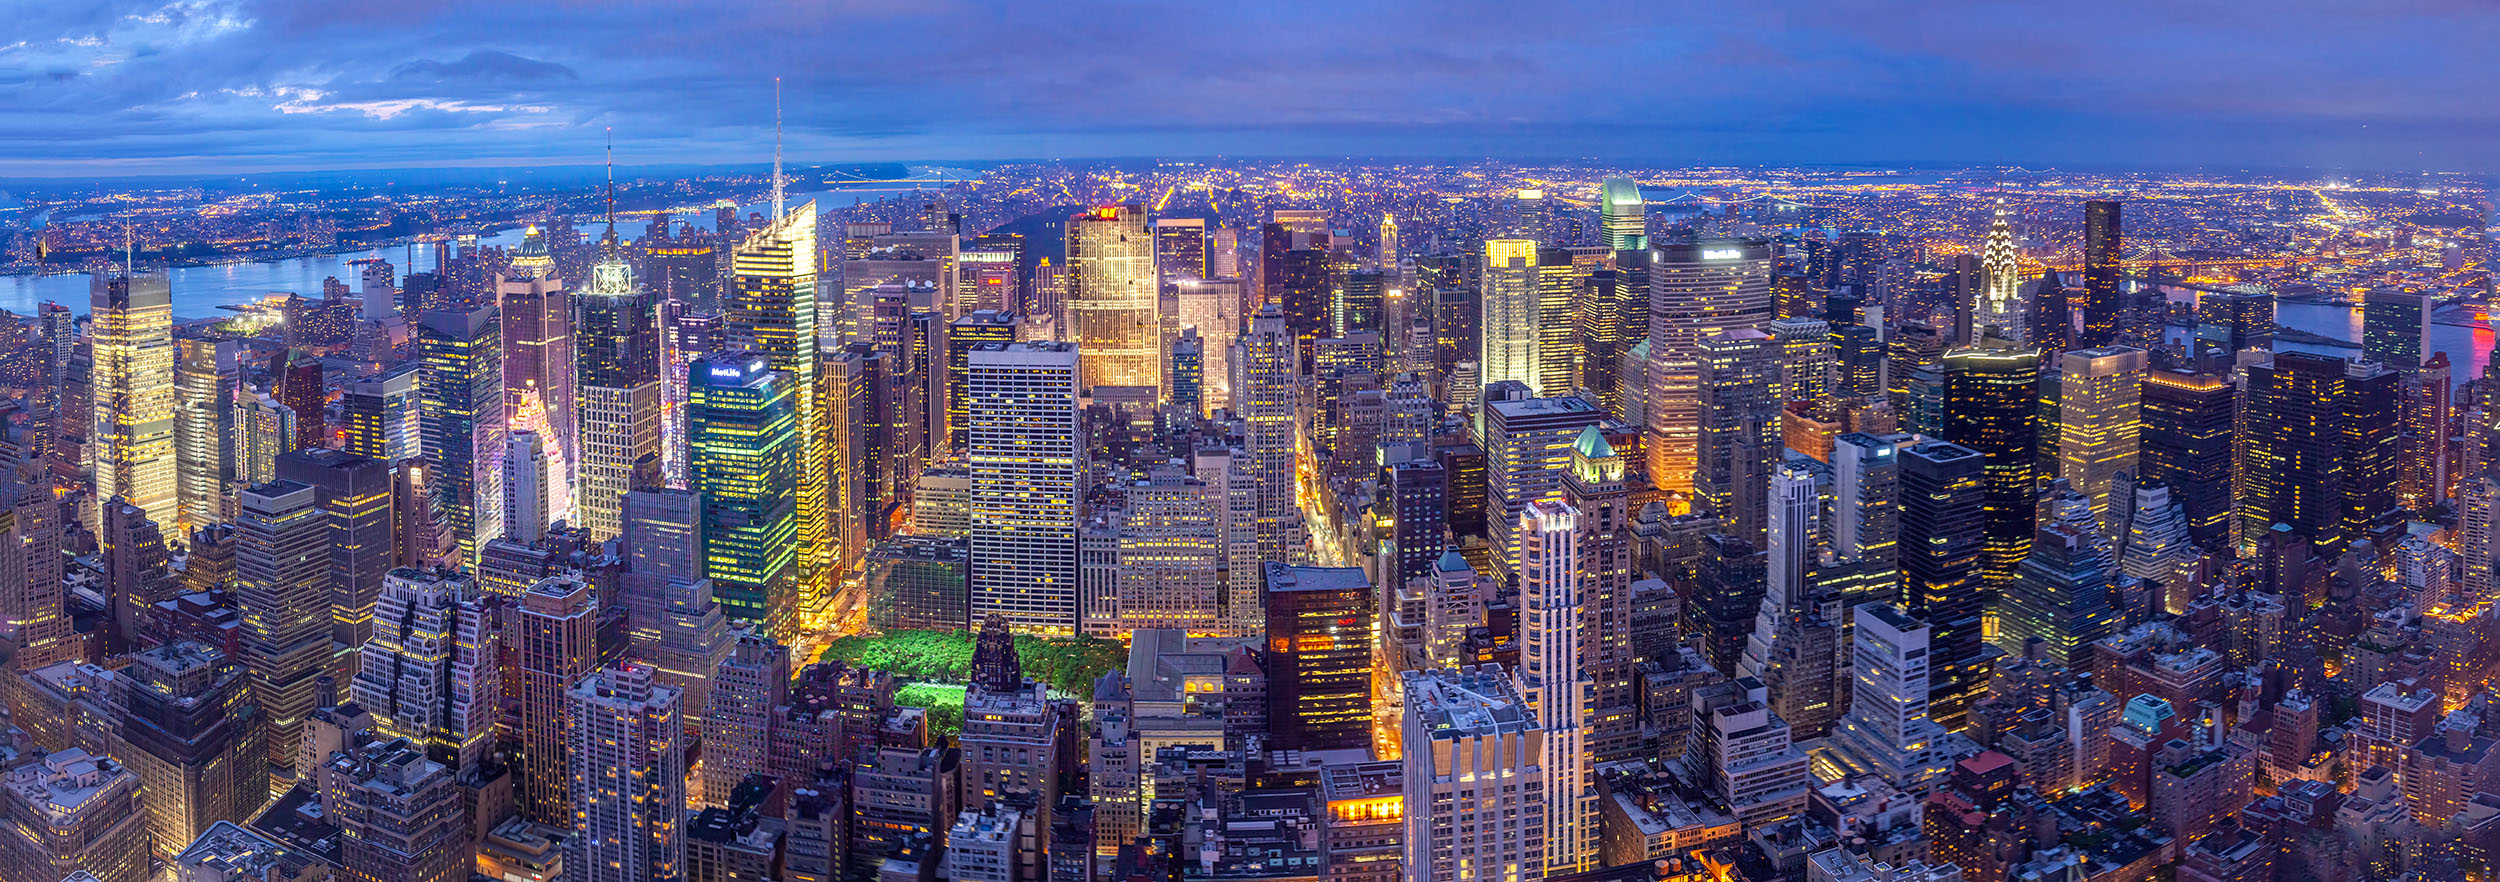 This 9-image stitched panoramic was captured from the pinnacle of the Empire State Building during the enchanting blue hour....